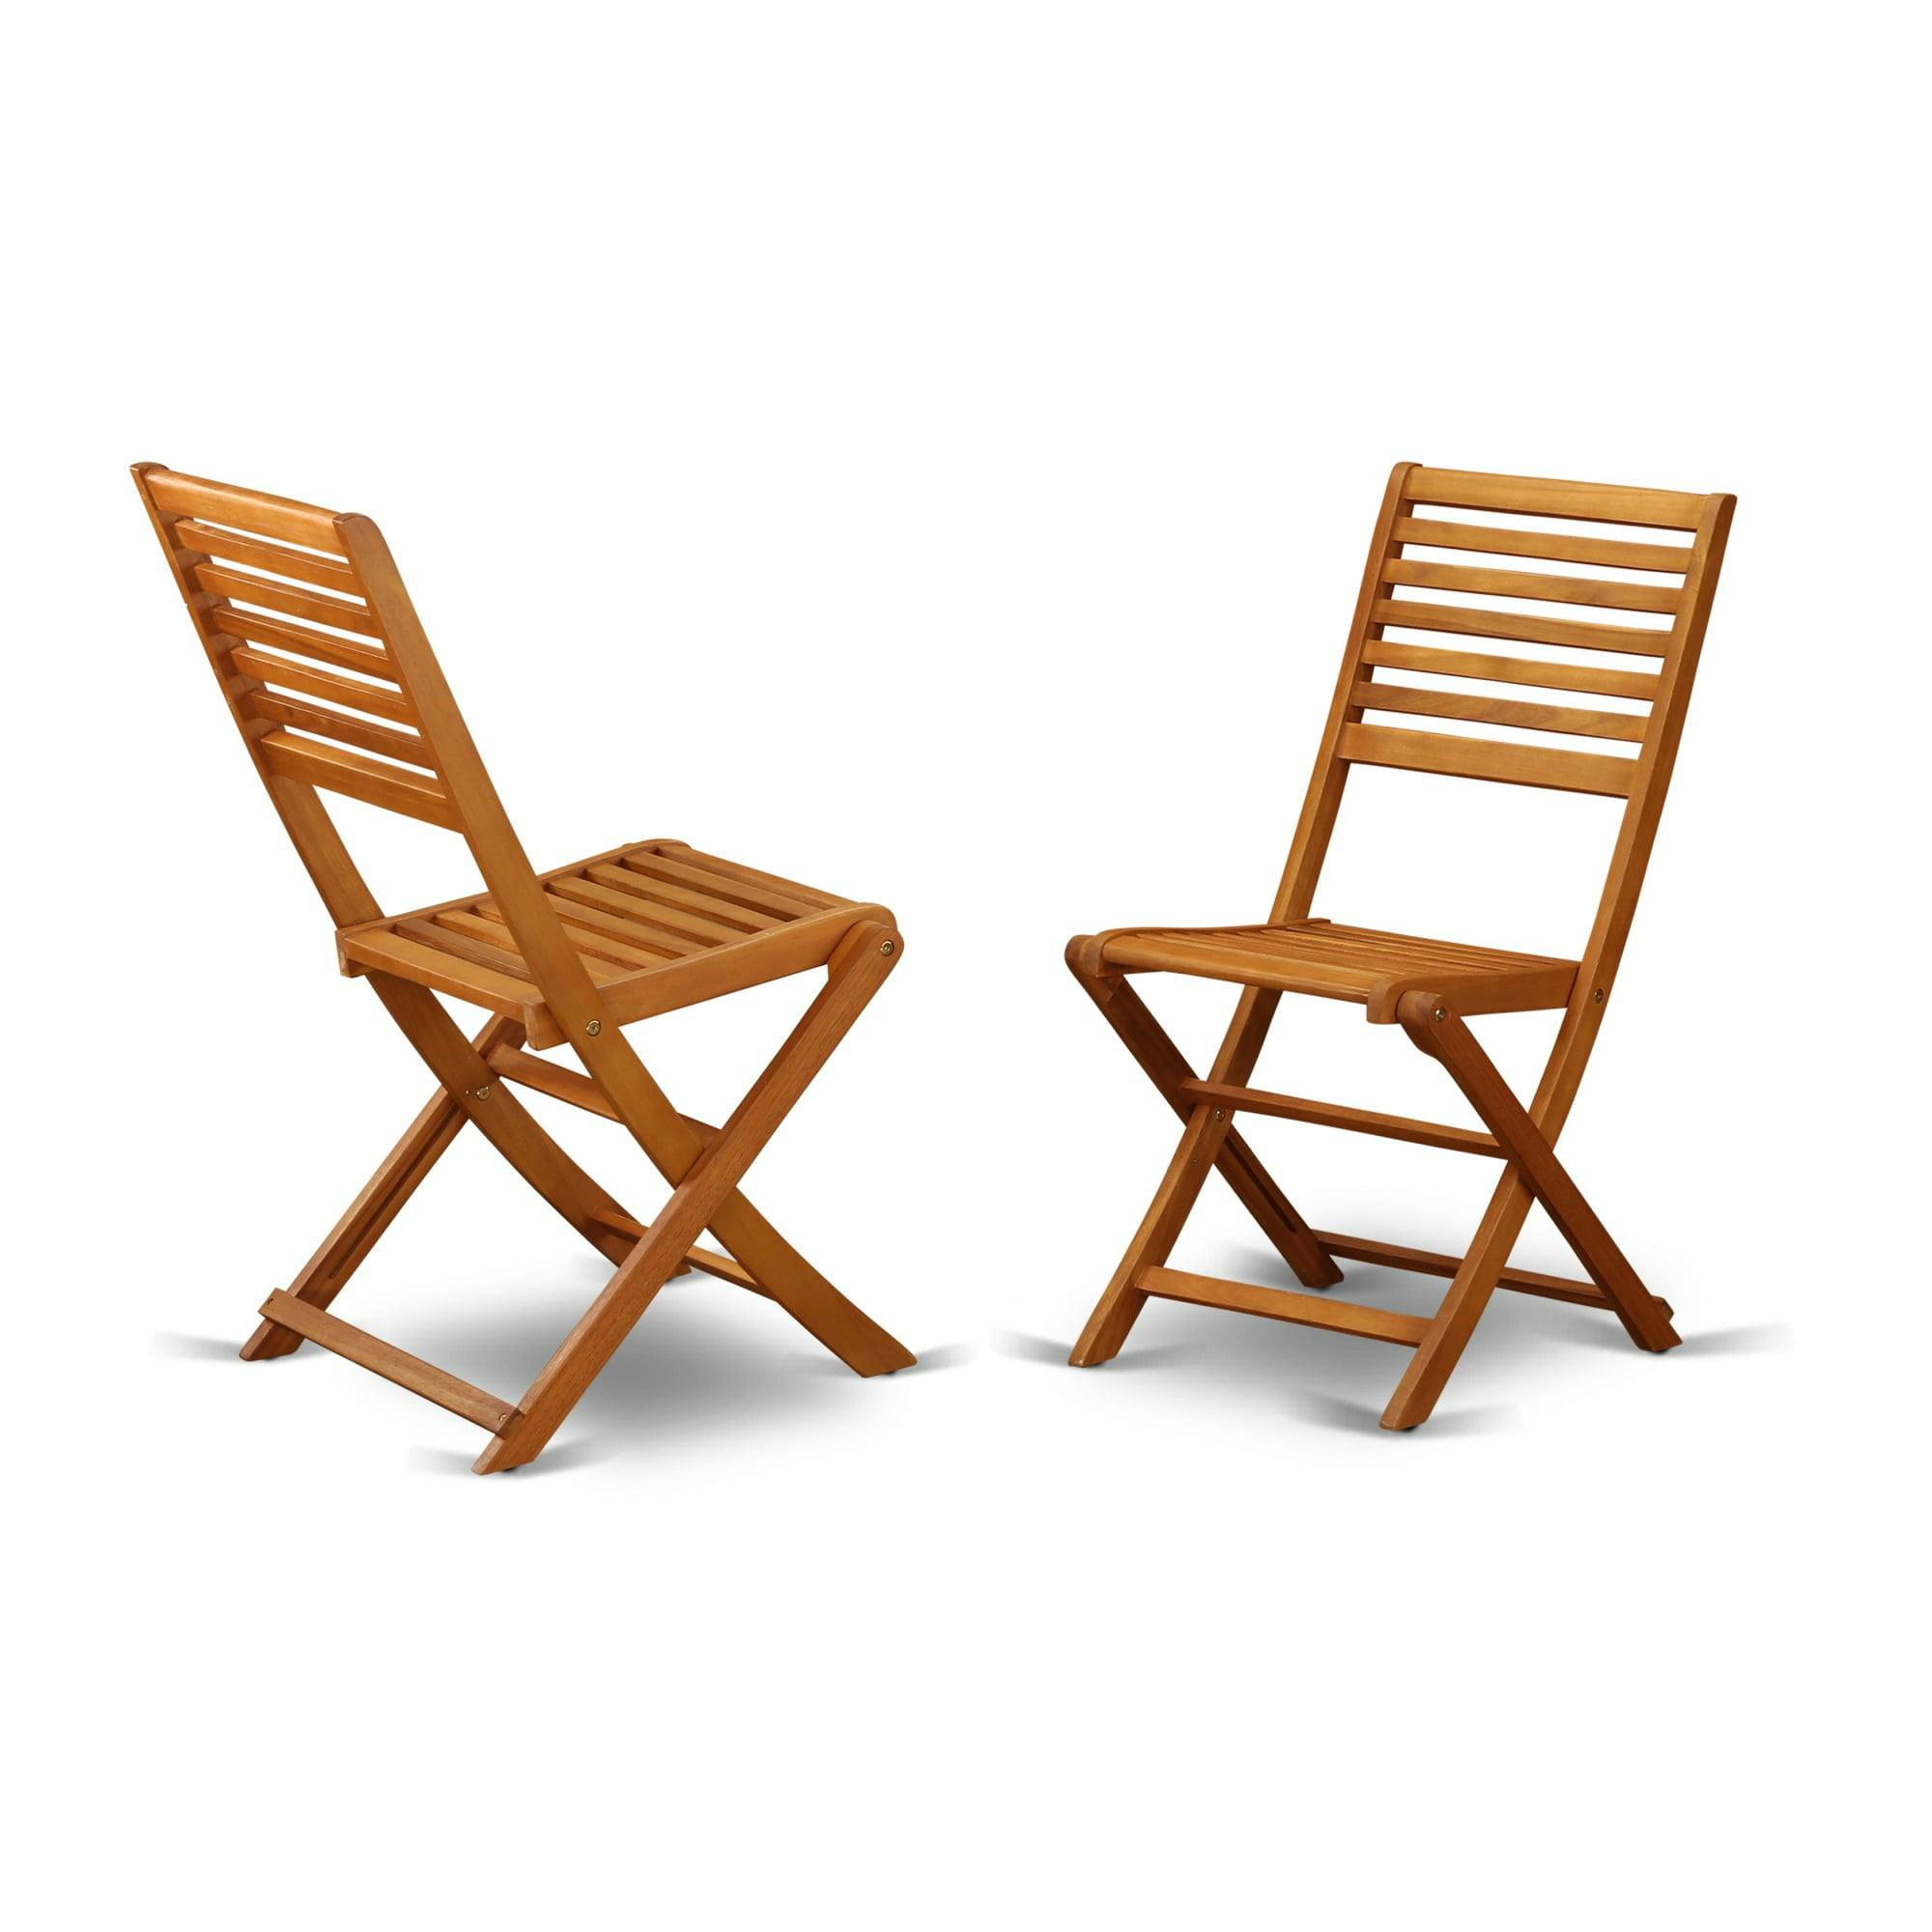 Cameron Foldable Acacia Wood Outdoor Dining Chair - Set of 2